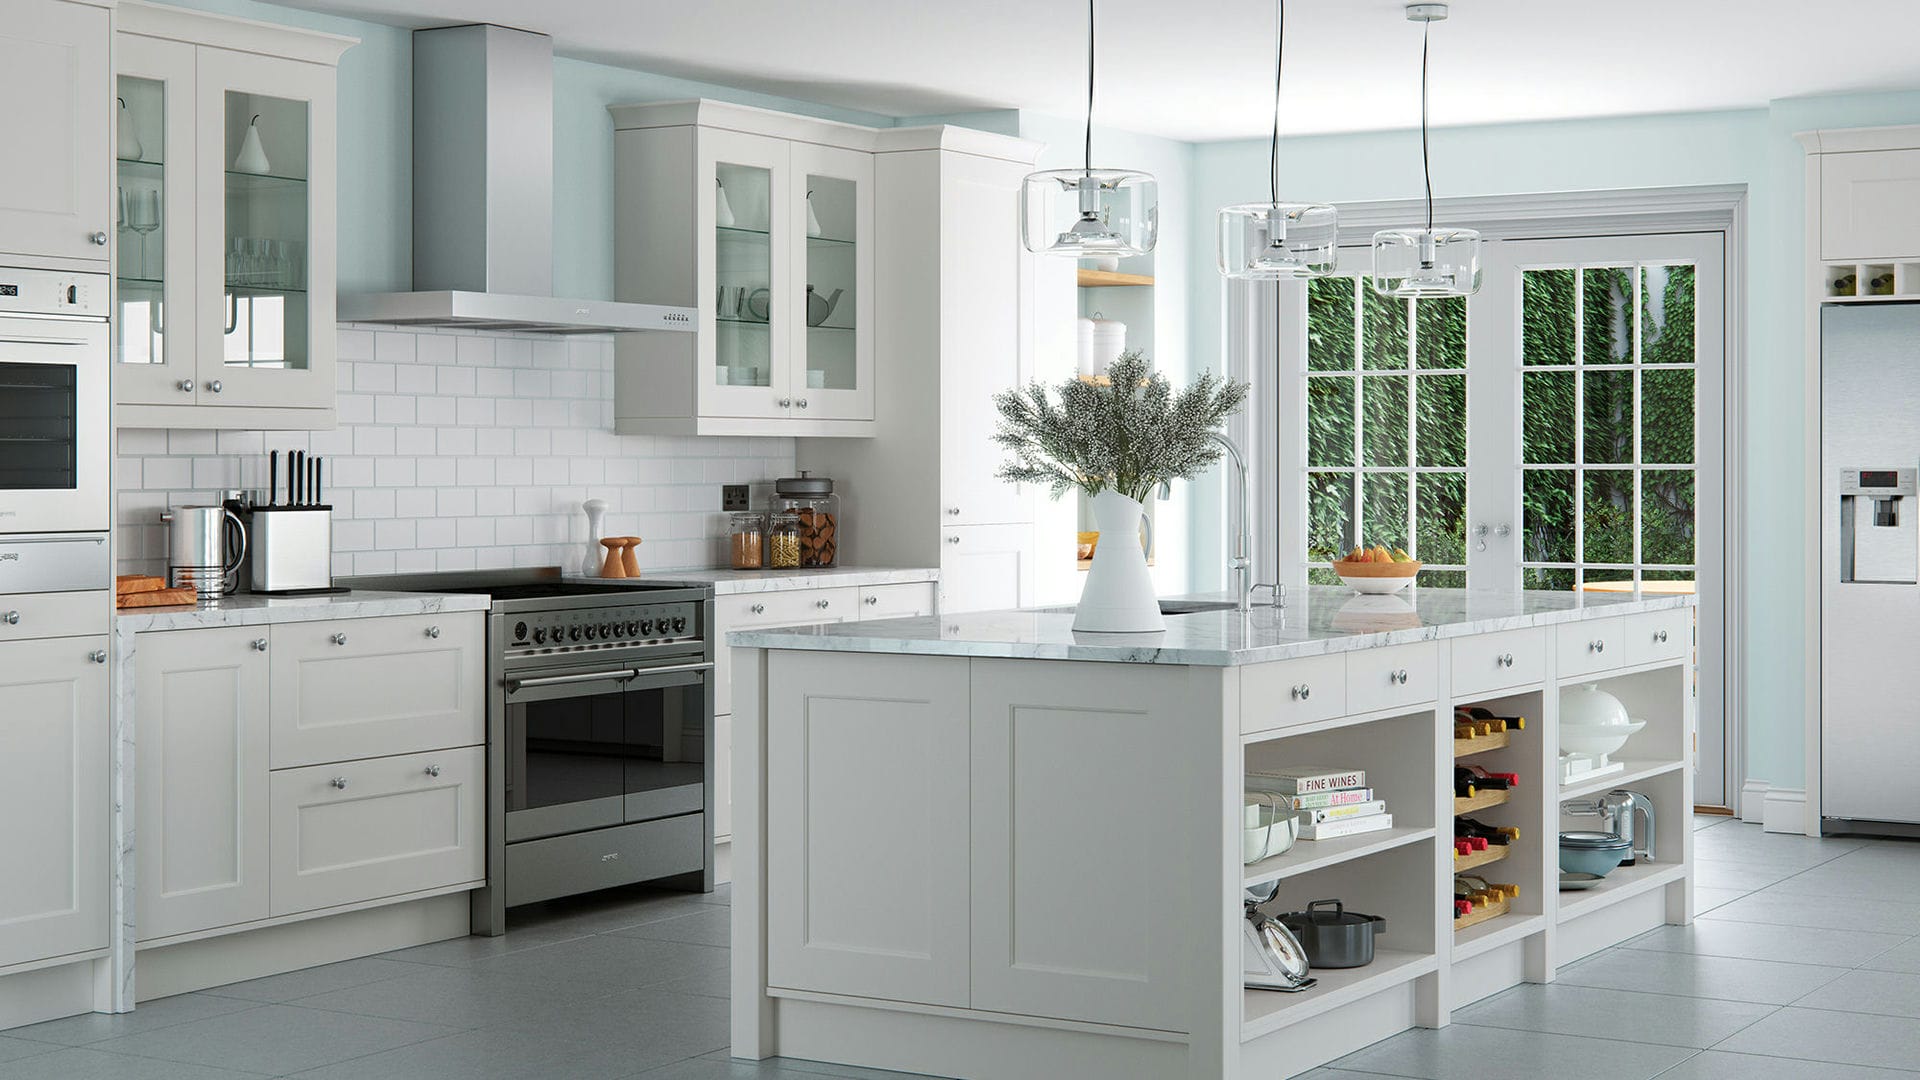 Florence light grey smooth shaker kitchens merging traditional shaker design with a chic light grey finish